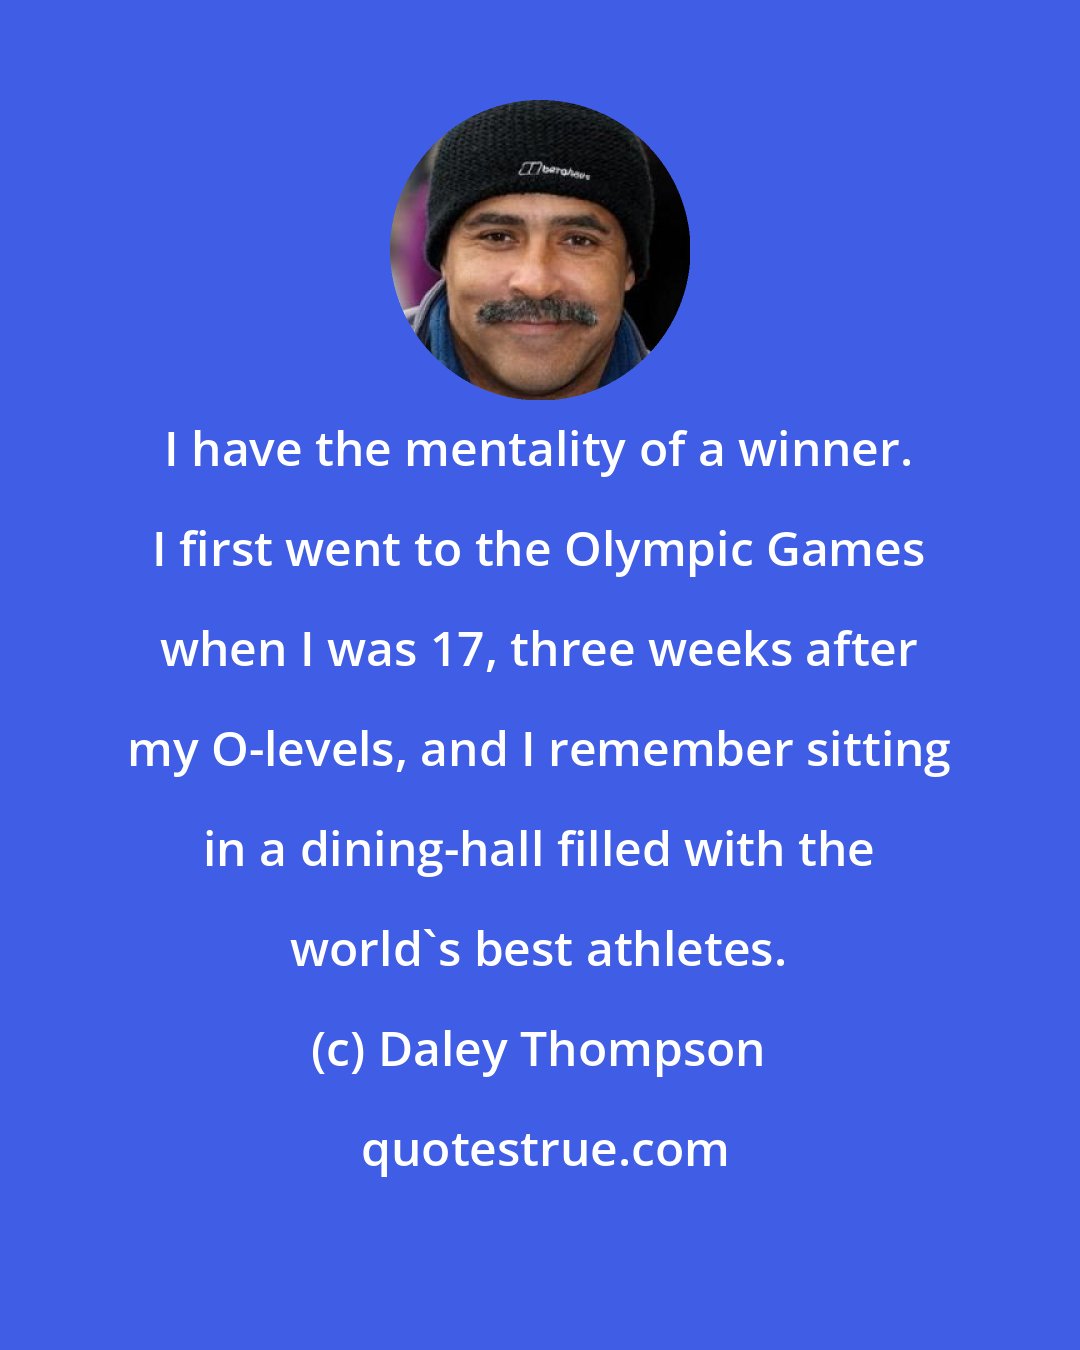 Daley Thompson: I have the mentality of a winner. I first went to the Olympic Games when I was 17, three weeks after my O-levels, and I remember sitting in a dining-hall filled with the world's best athletes.